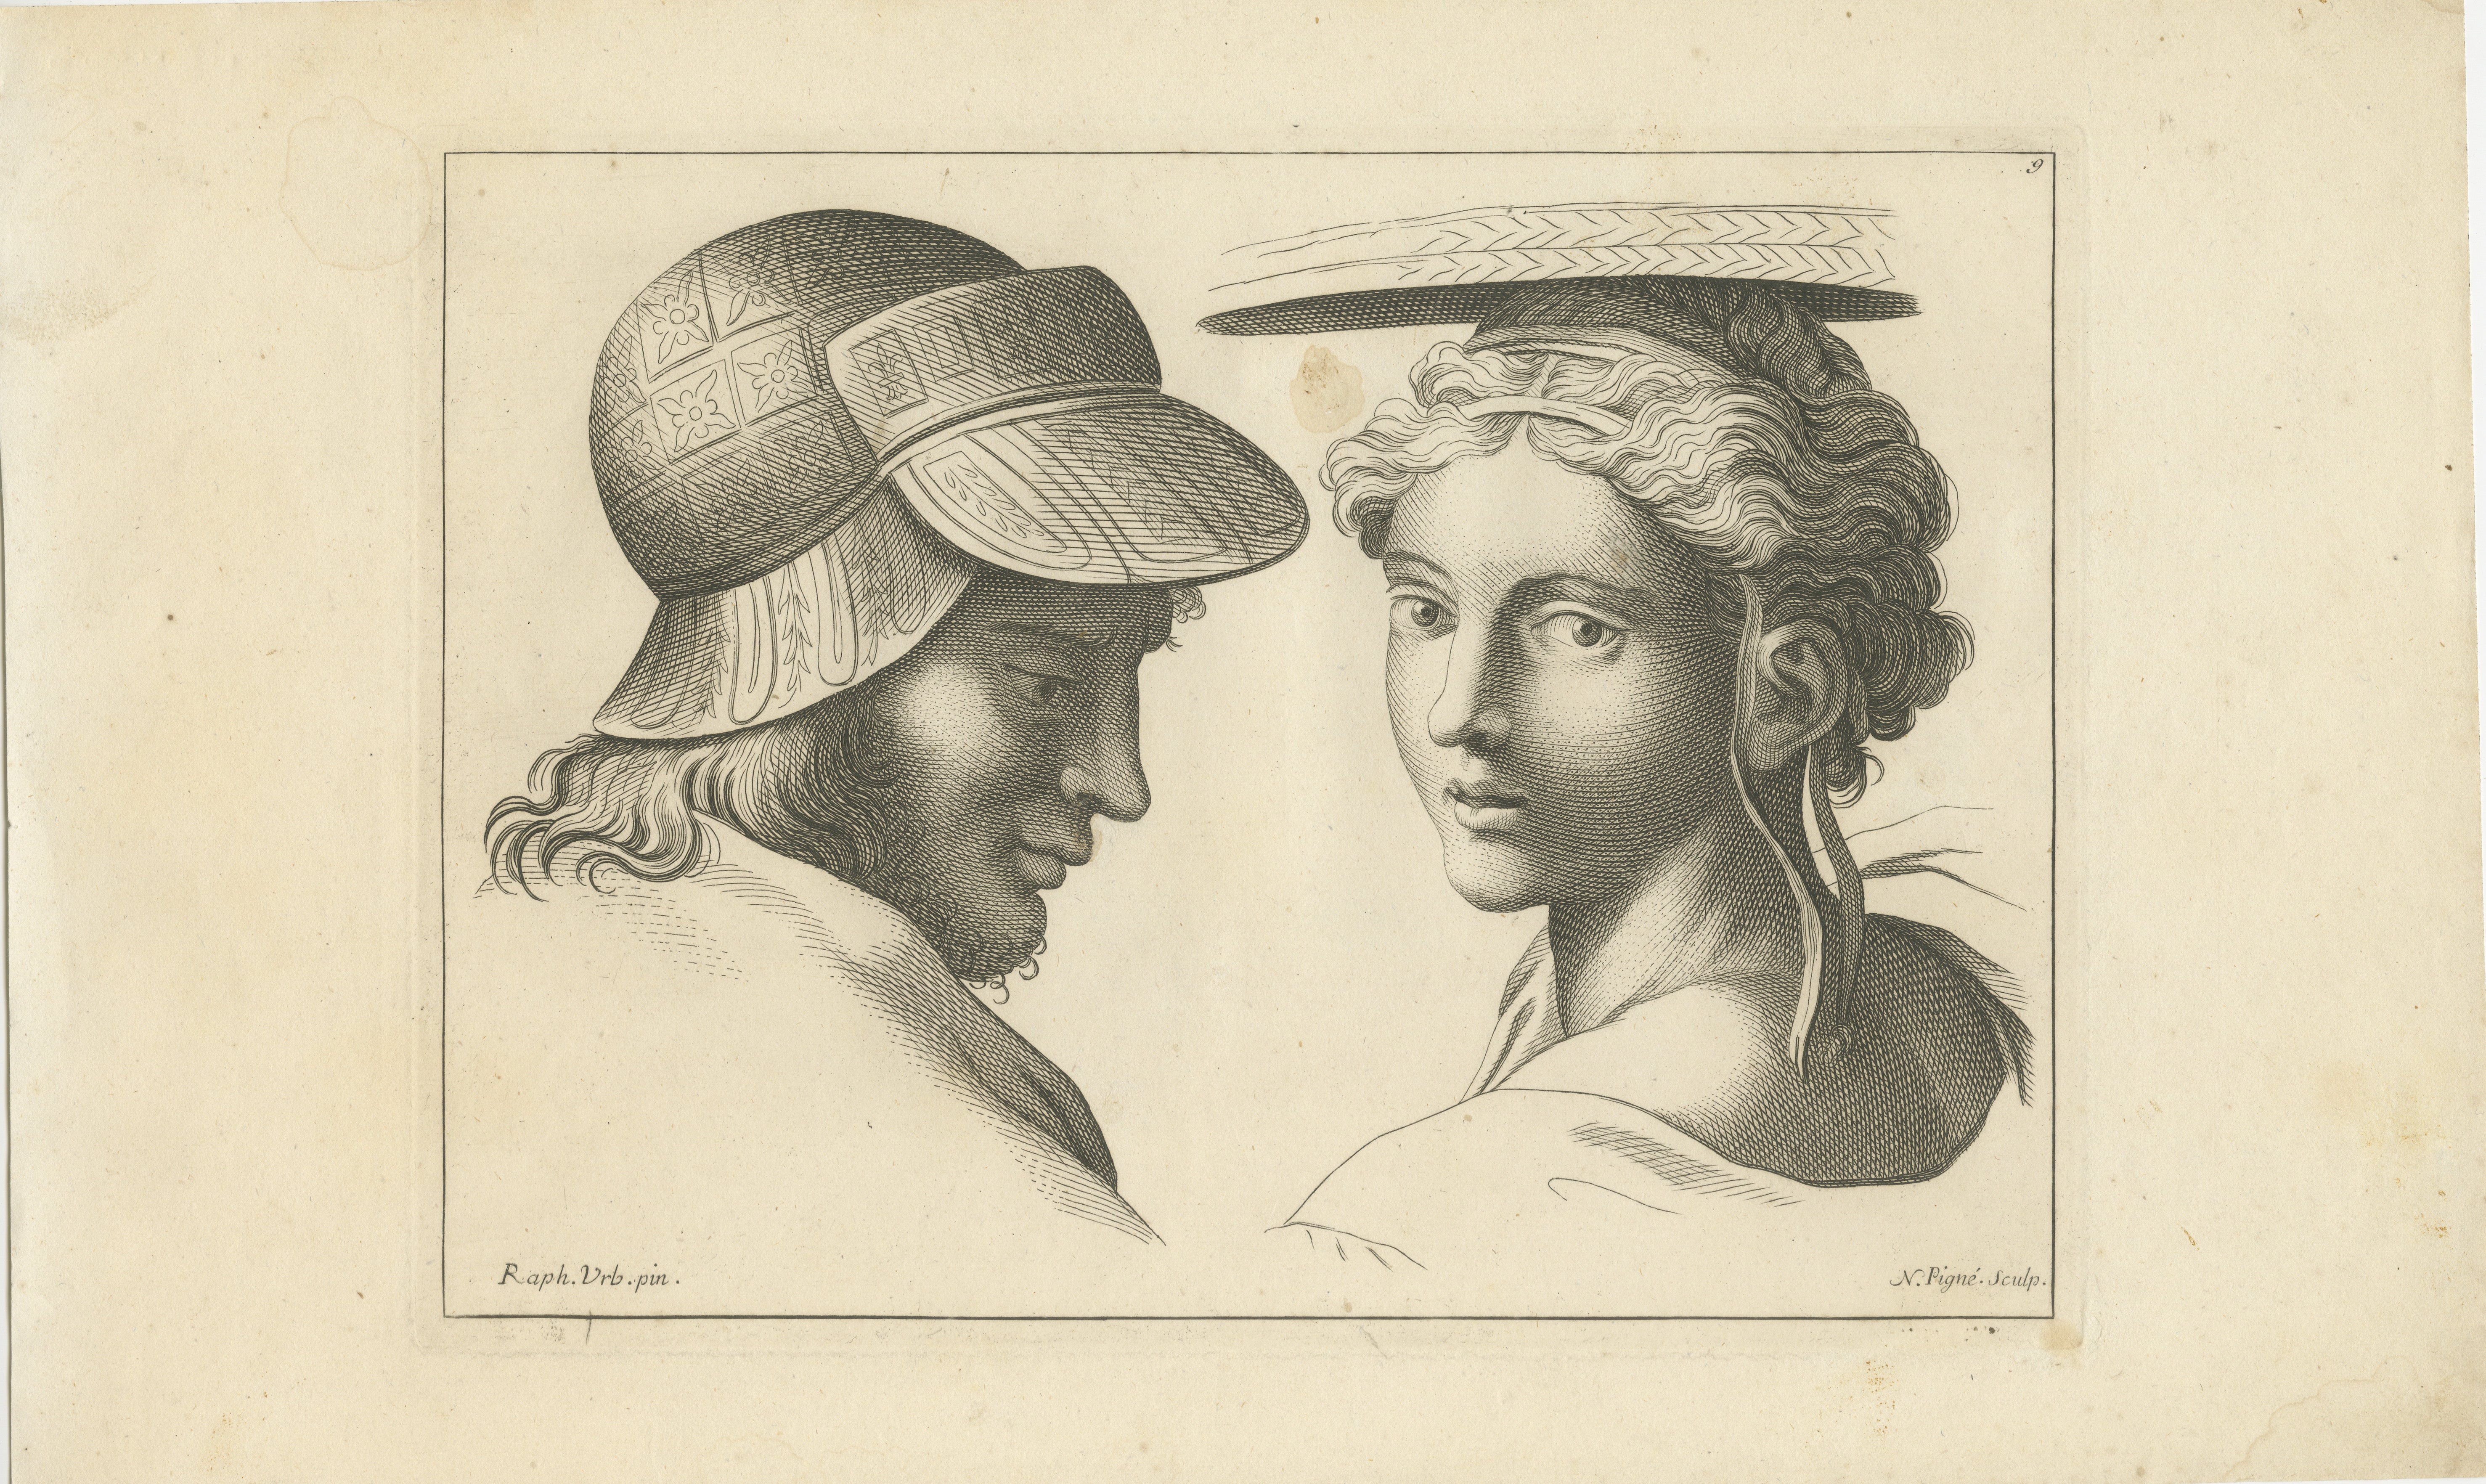 This engraving depicts two contrasting profiles. On the left is a male figure adorned with a detailed, patterned cap, his features marked by a hooked nose and a small, tightly curled beard. He appears to be in mid-conversation, his mouth slightly